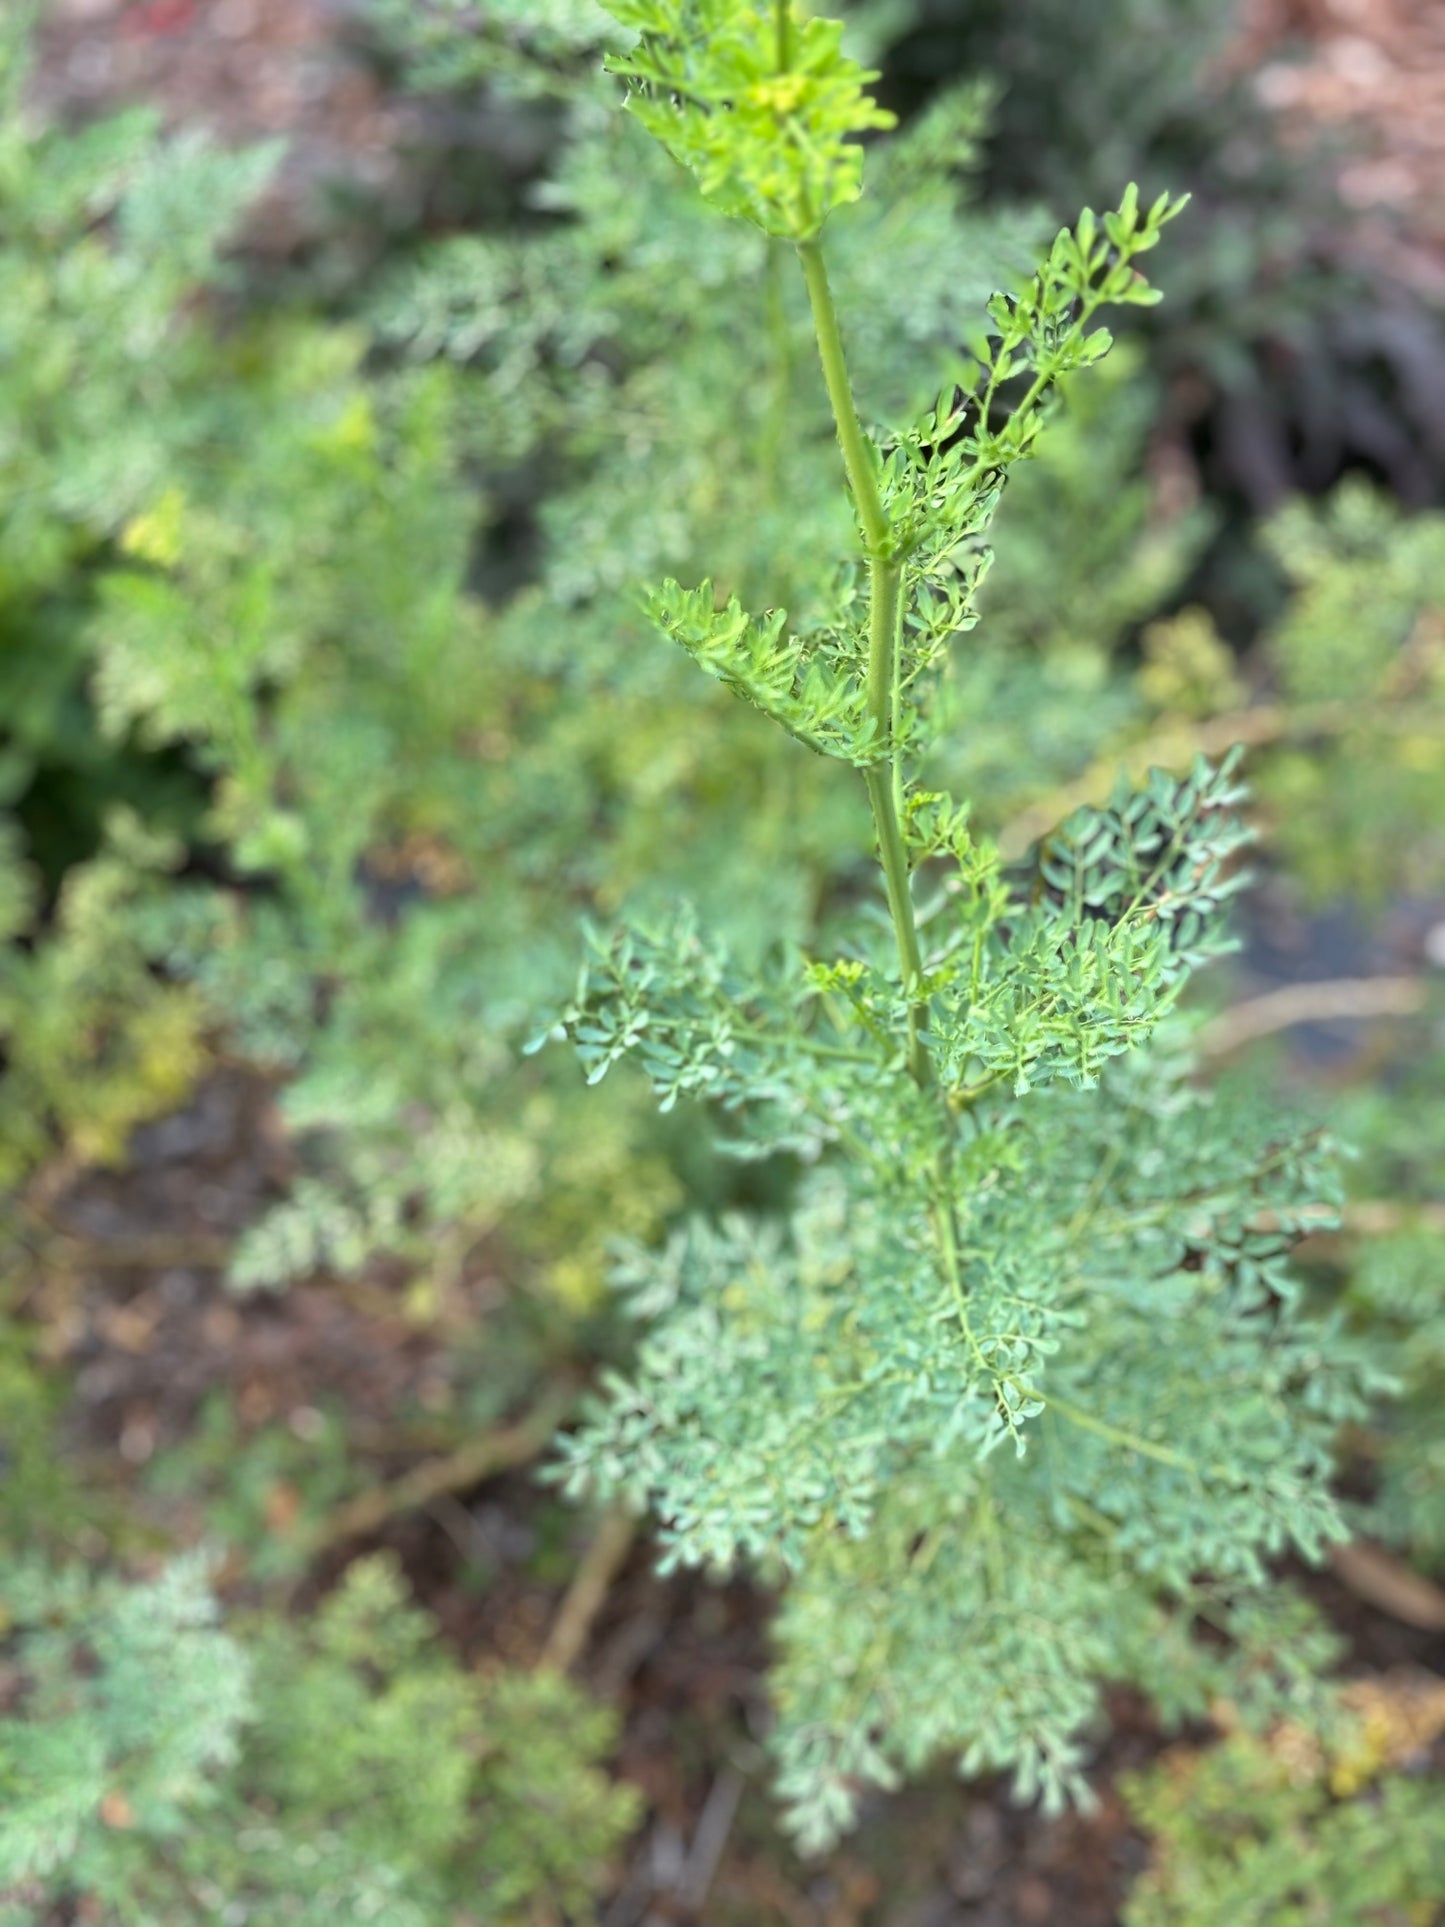 ruta leaf is uses as a host plant for black swallowtail